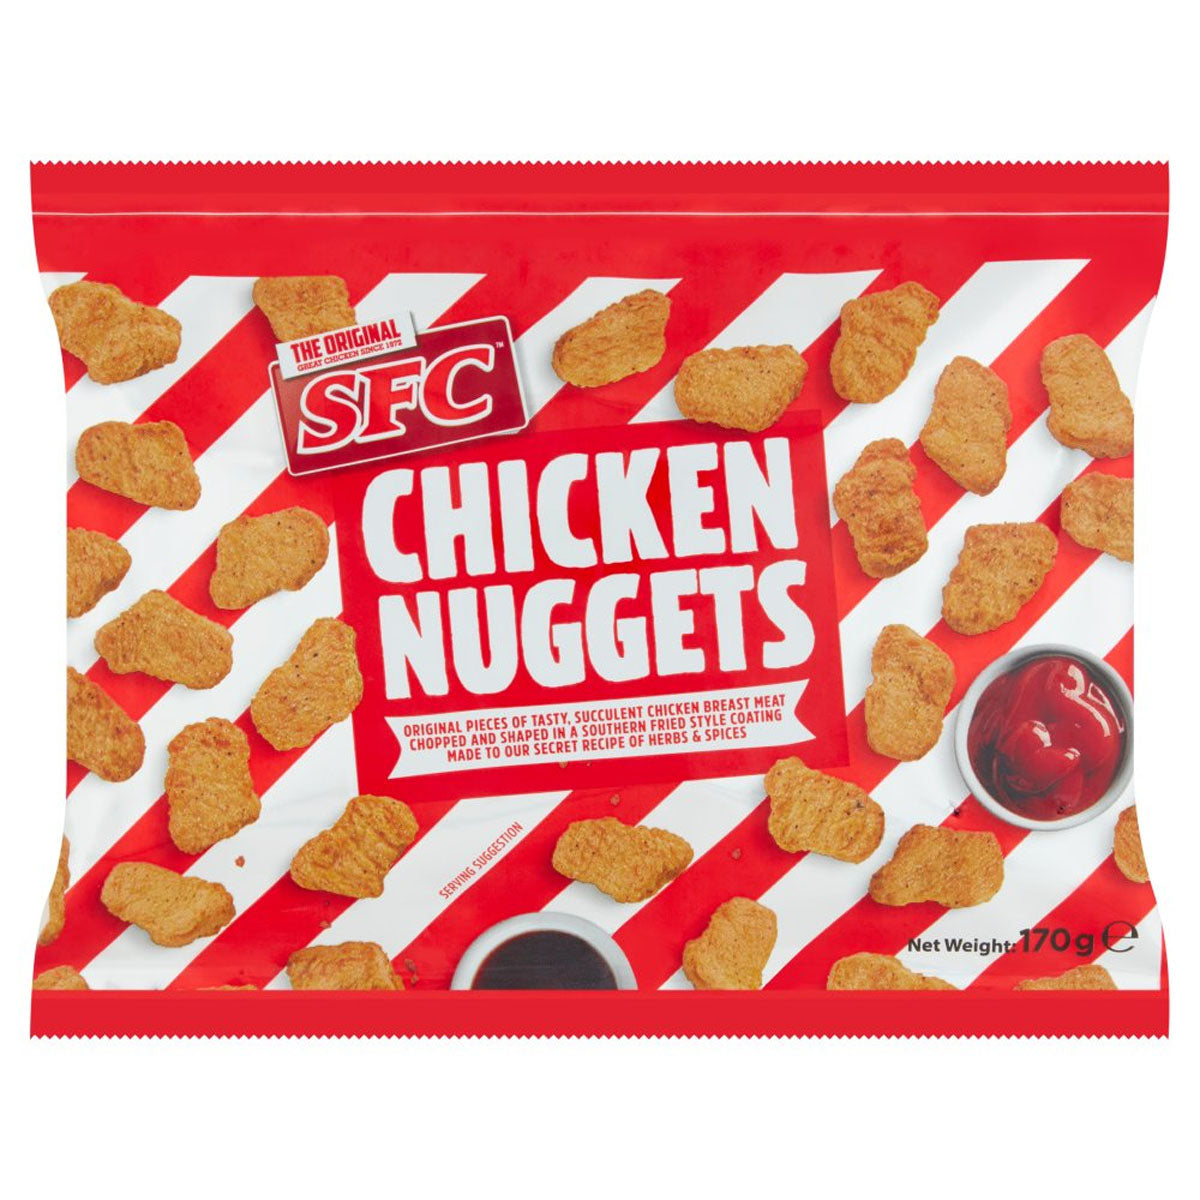 A bag of SFC - Chicken Nuggets - 170g on a white background.